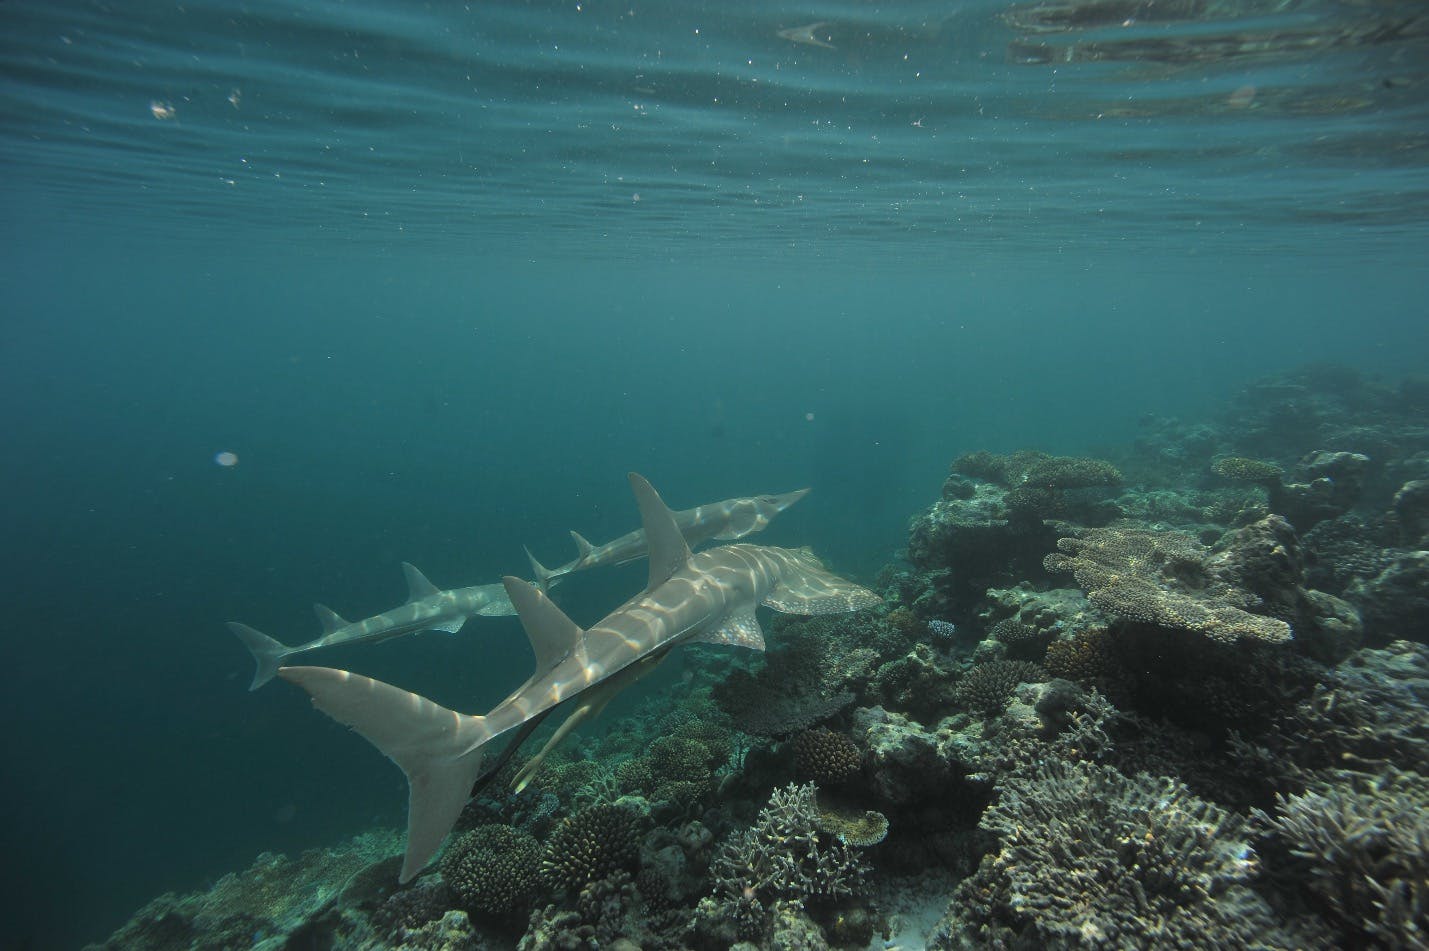 Improving the understanding of threatened wedgefish and guitarfish to inform CITES assessments